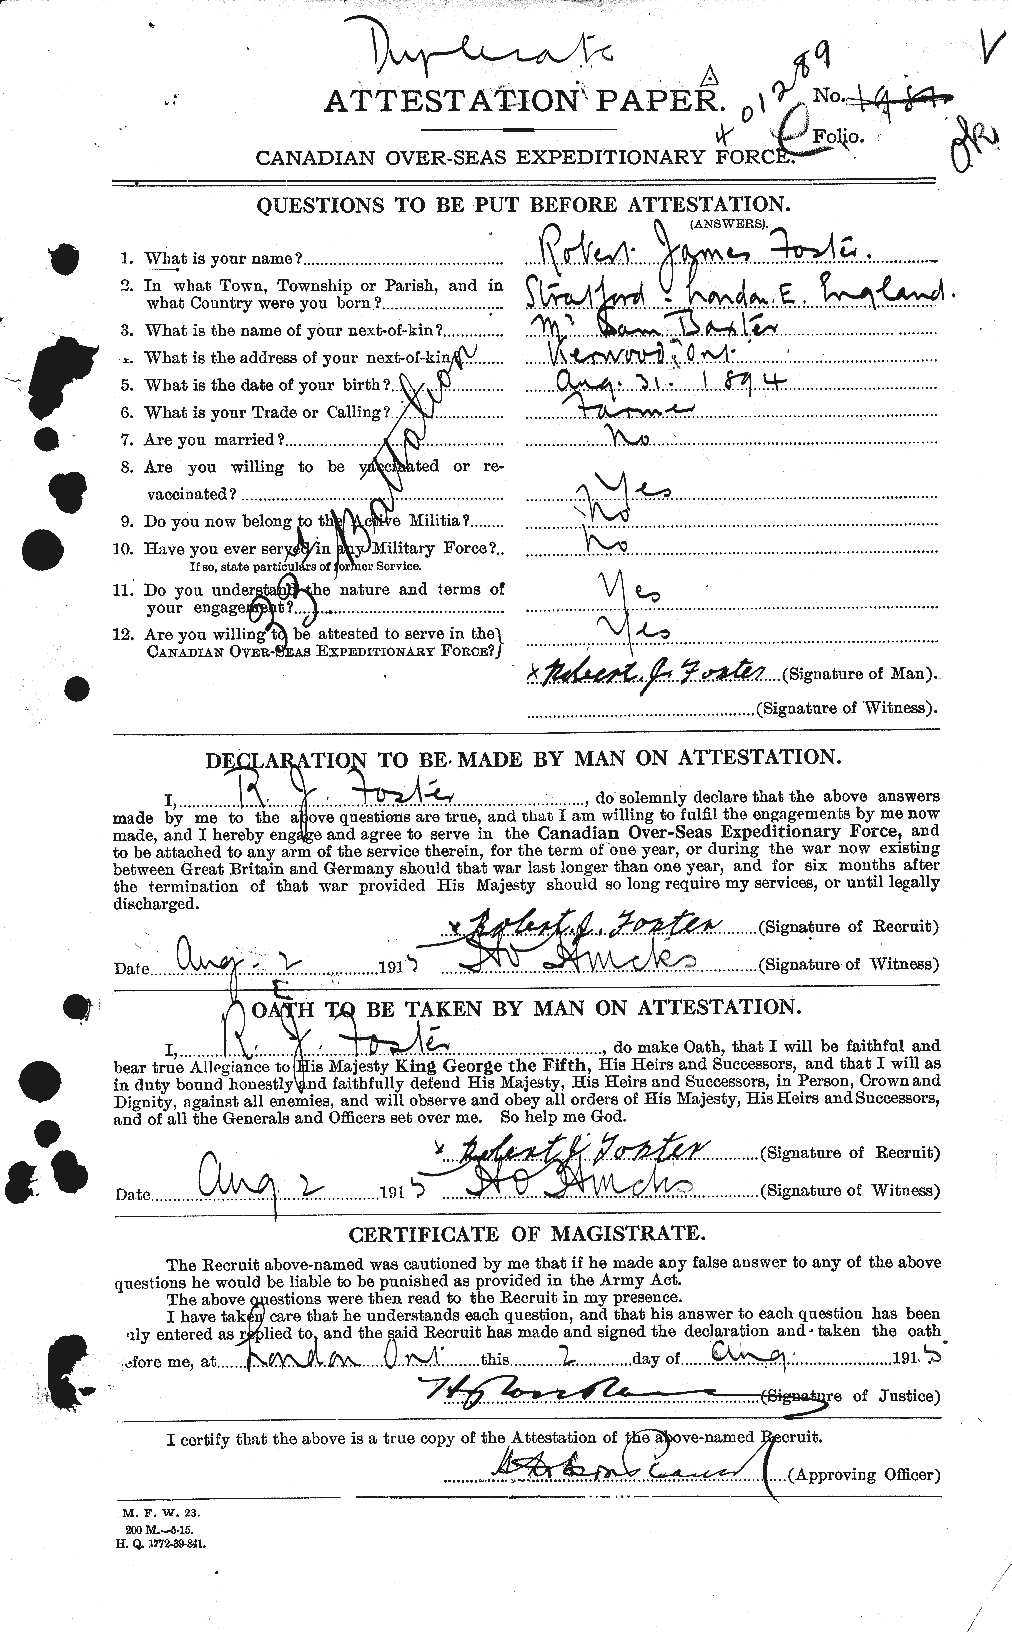 Personnel Records of the First World War - CEF 335179a